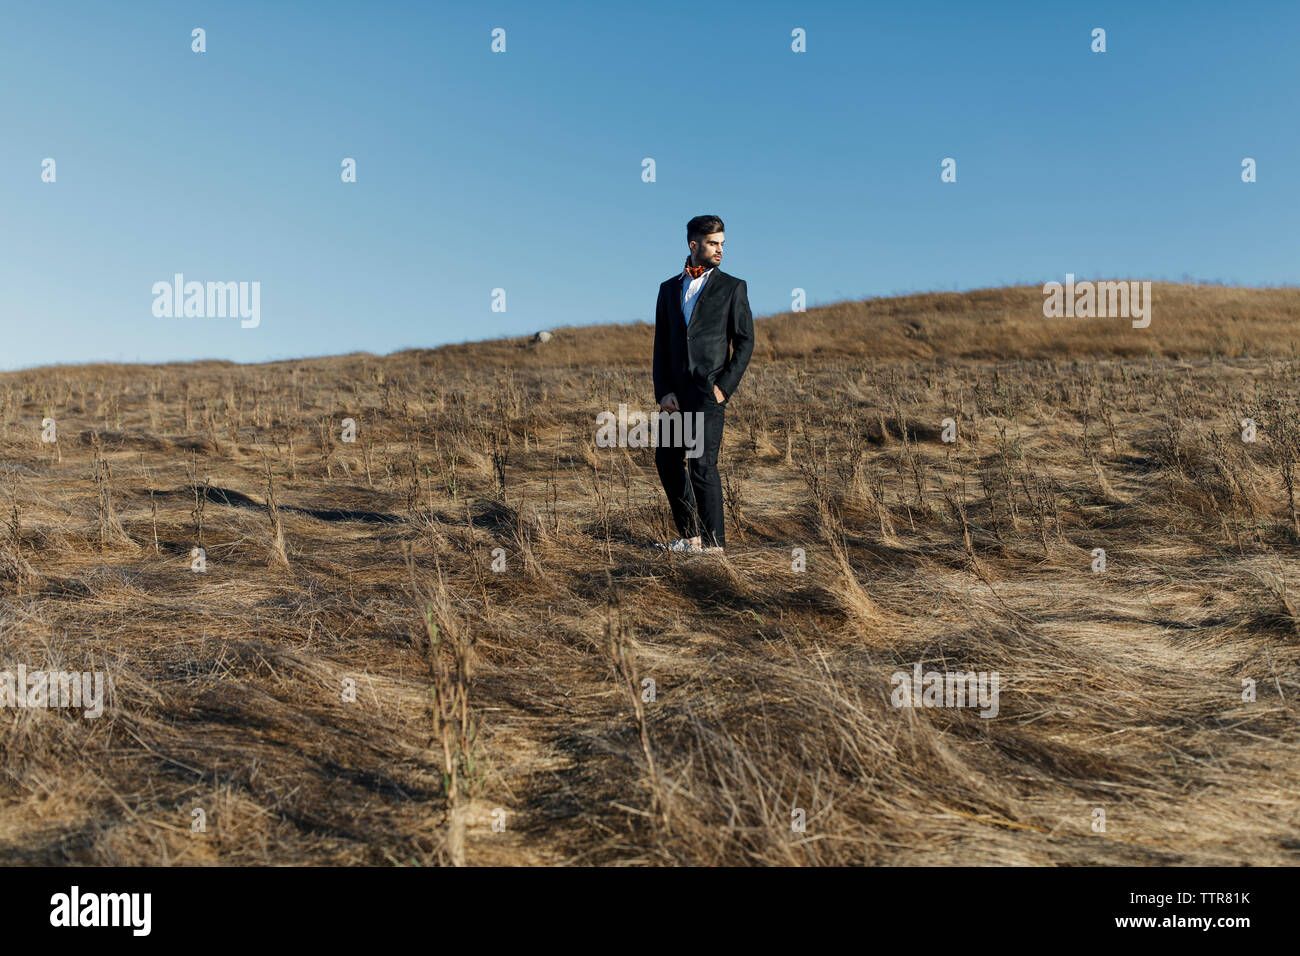 Young fashion investor man exploring a field against blue sky Stock Photo